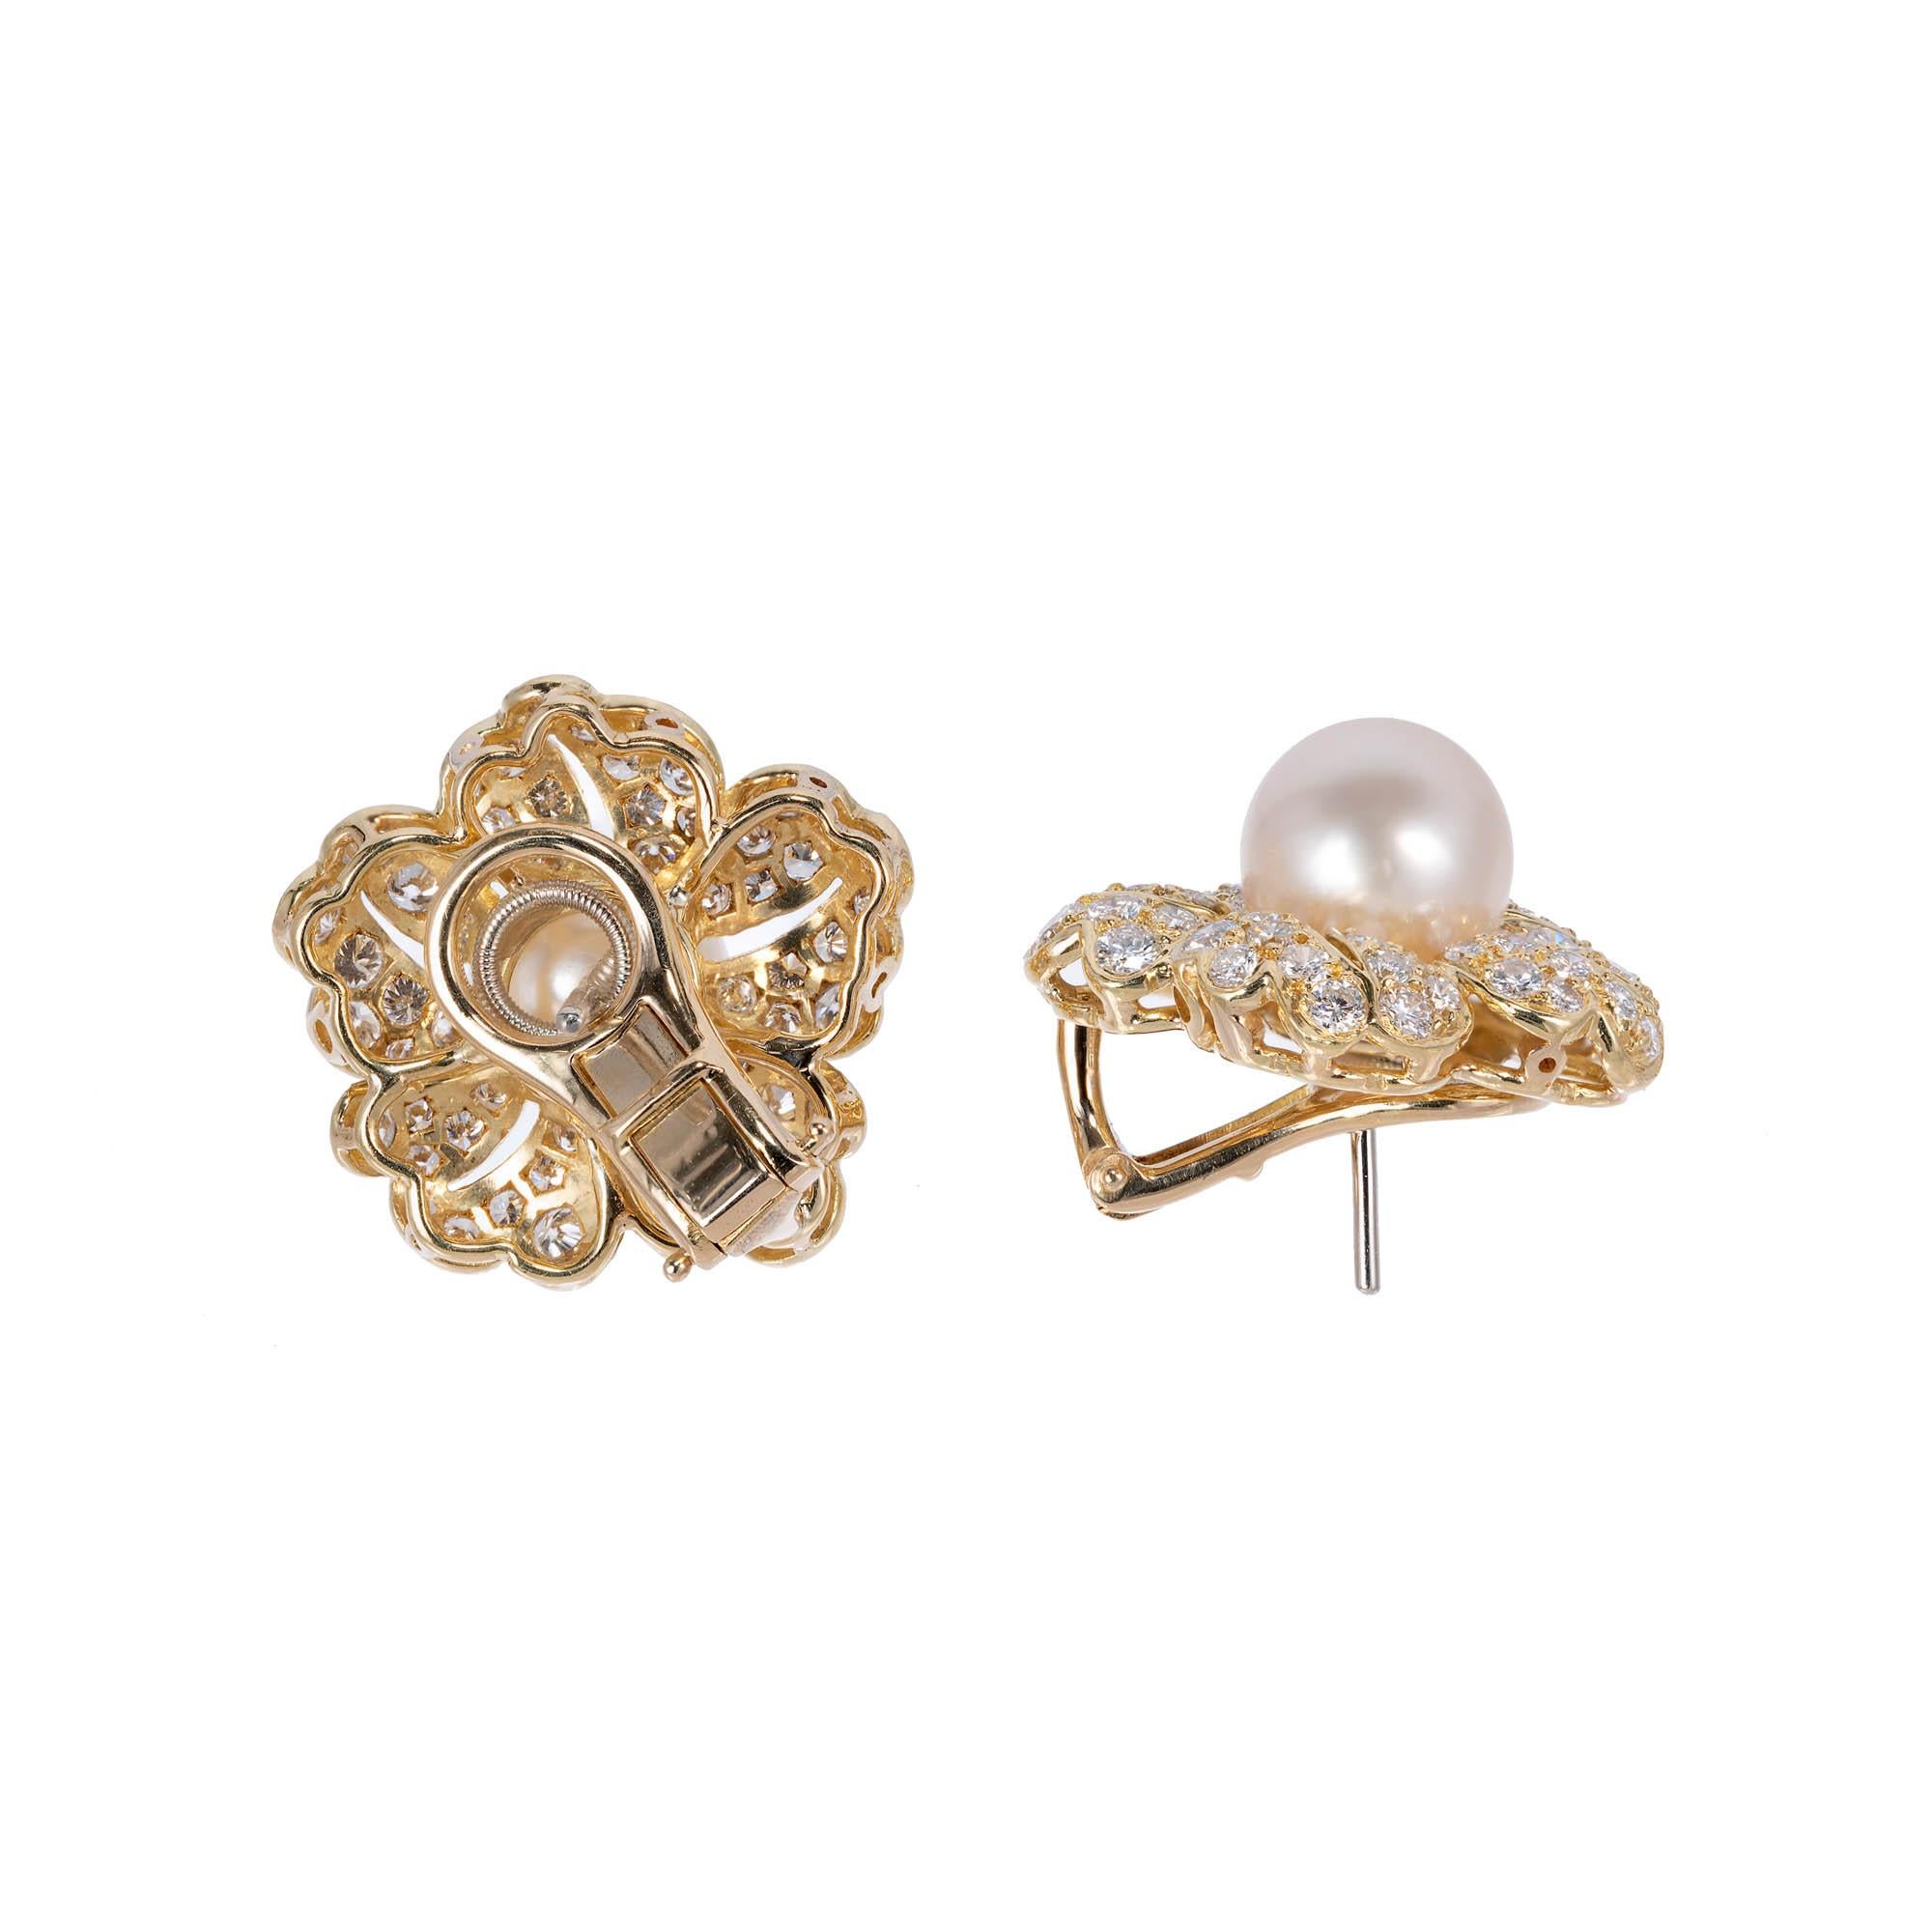 Cultured pearl and diamond clip post earrings in 14k yellow gold earrings. diamond flower design with 2 round pearl centers. clip post. 

2 cultured pearls 9.6-9.7mm
116 round brilliant cut F-G VVS-VS diamonds Approximate 2.30 carats 
14k Yellow